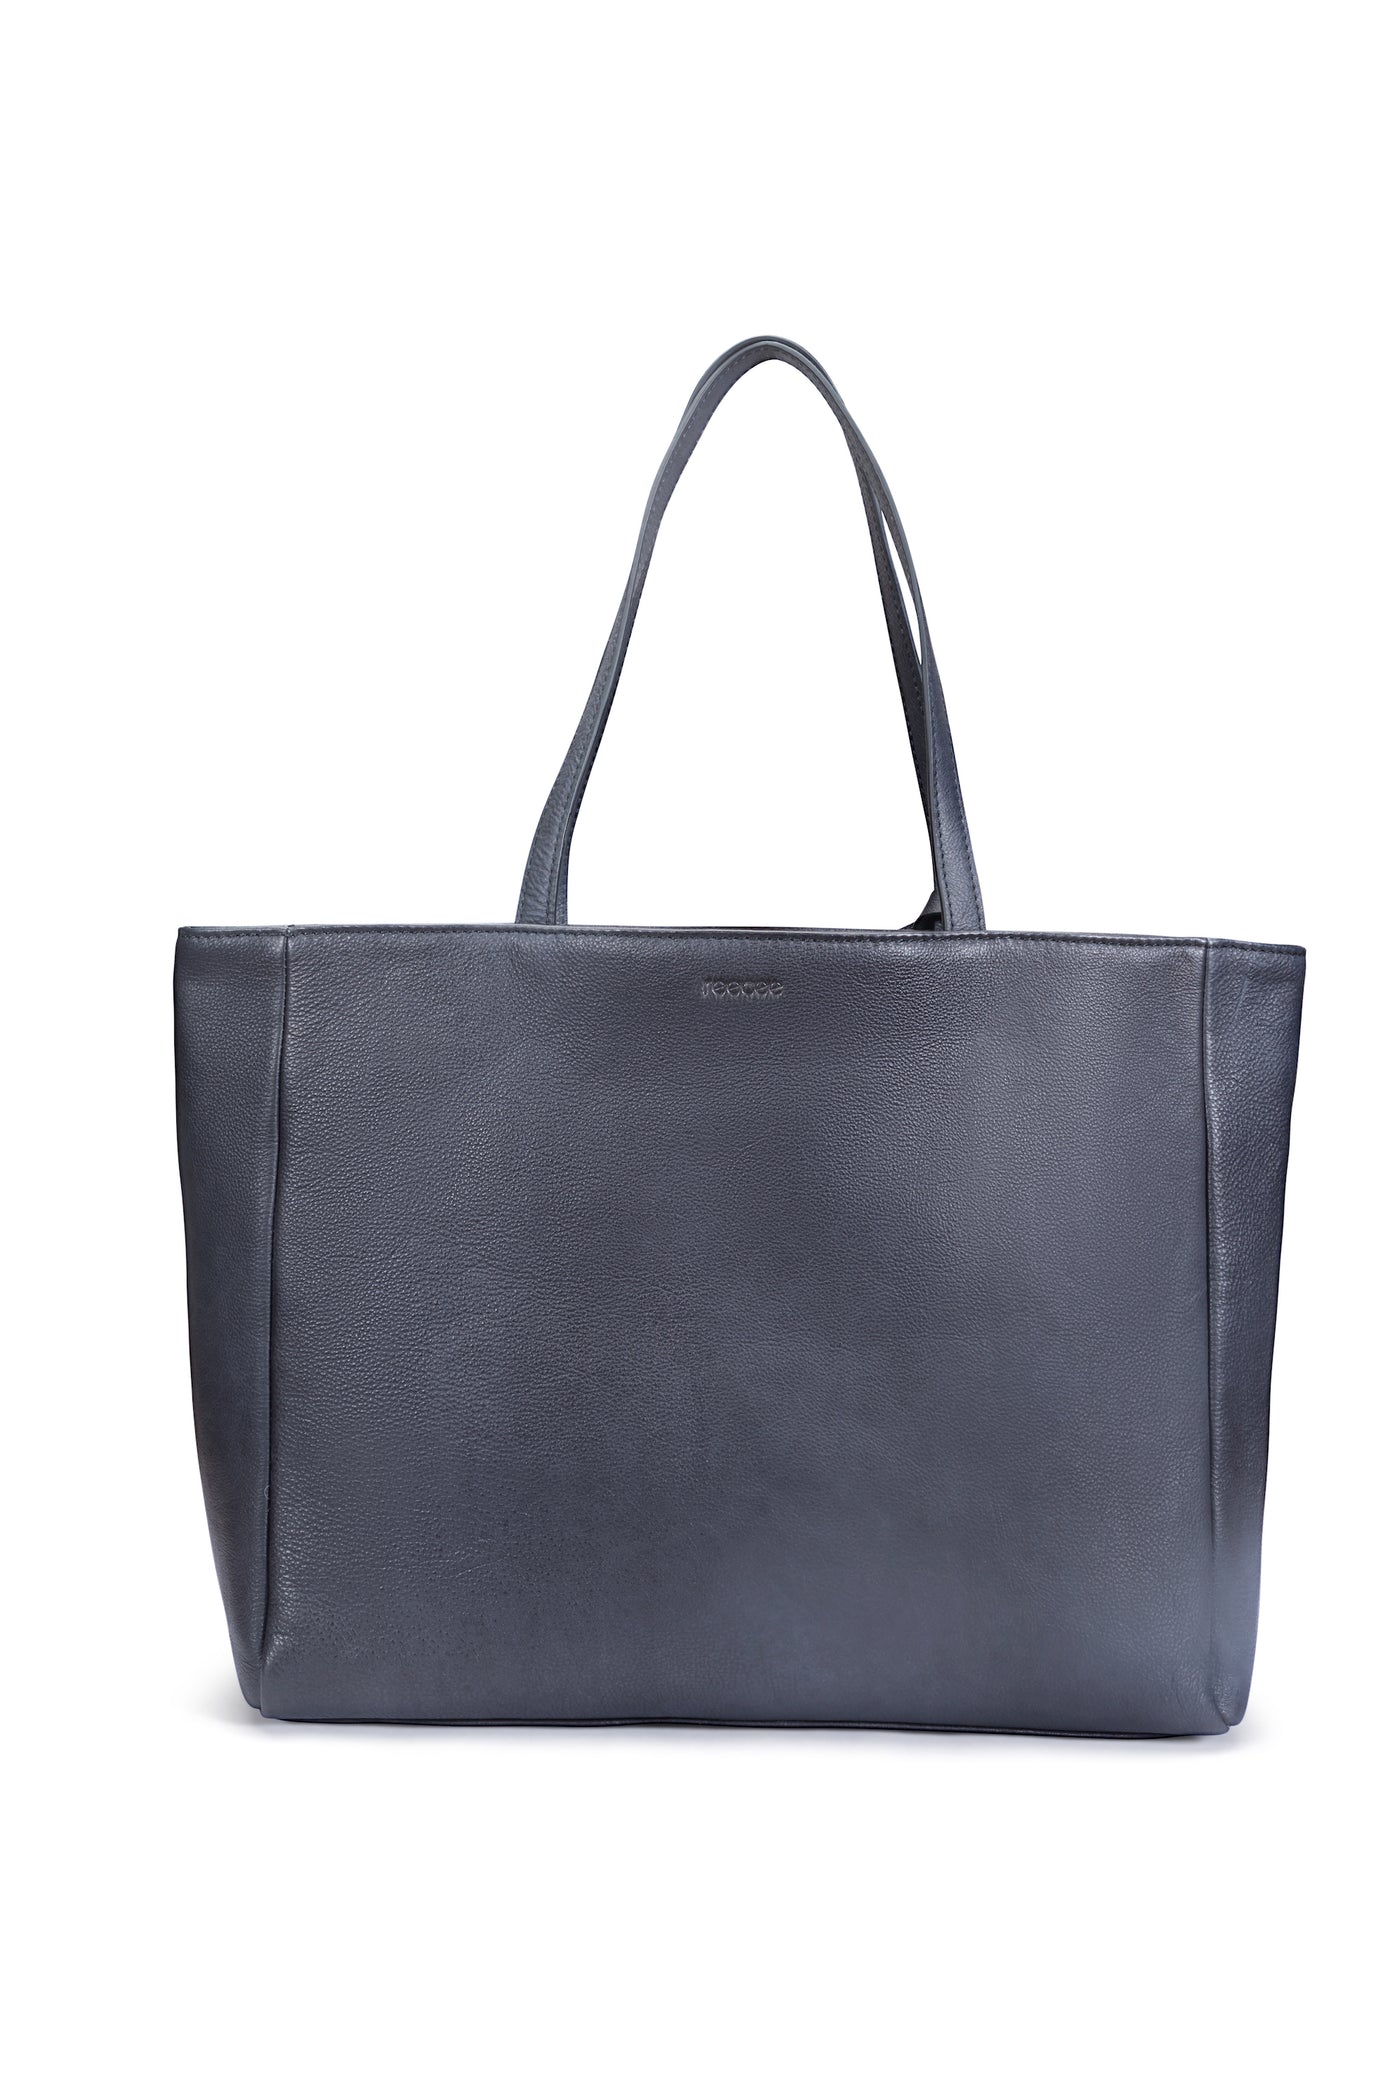 CLASSIC BLACK LEATHER TOTE BAG